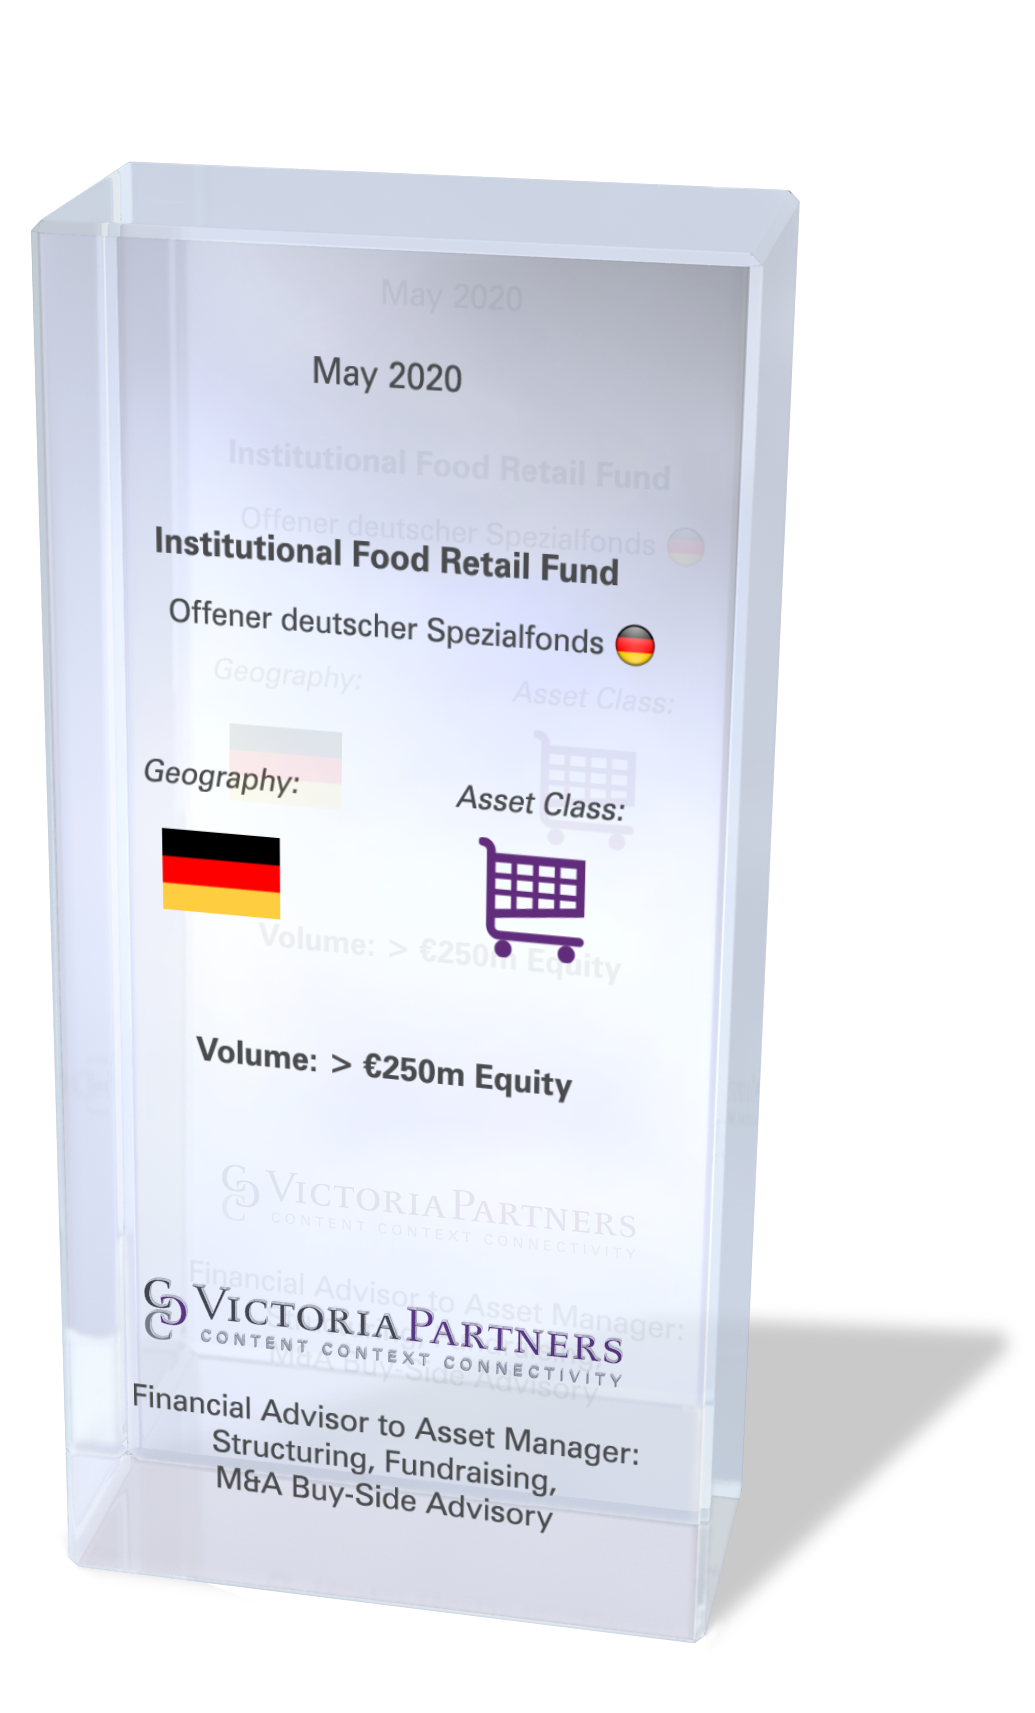 VICTORIAPARTNERS - Financial Advisor to Asset Manager: Structuring, Fundraising, M&A Buy-Side Advisory in Germany- May 2020